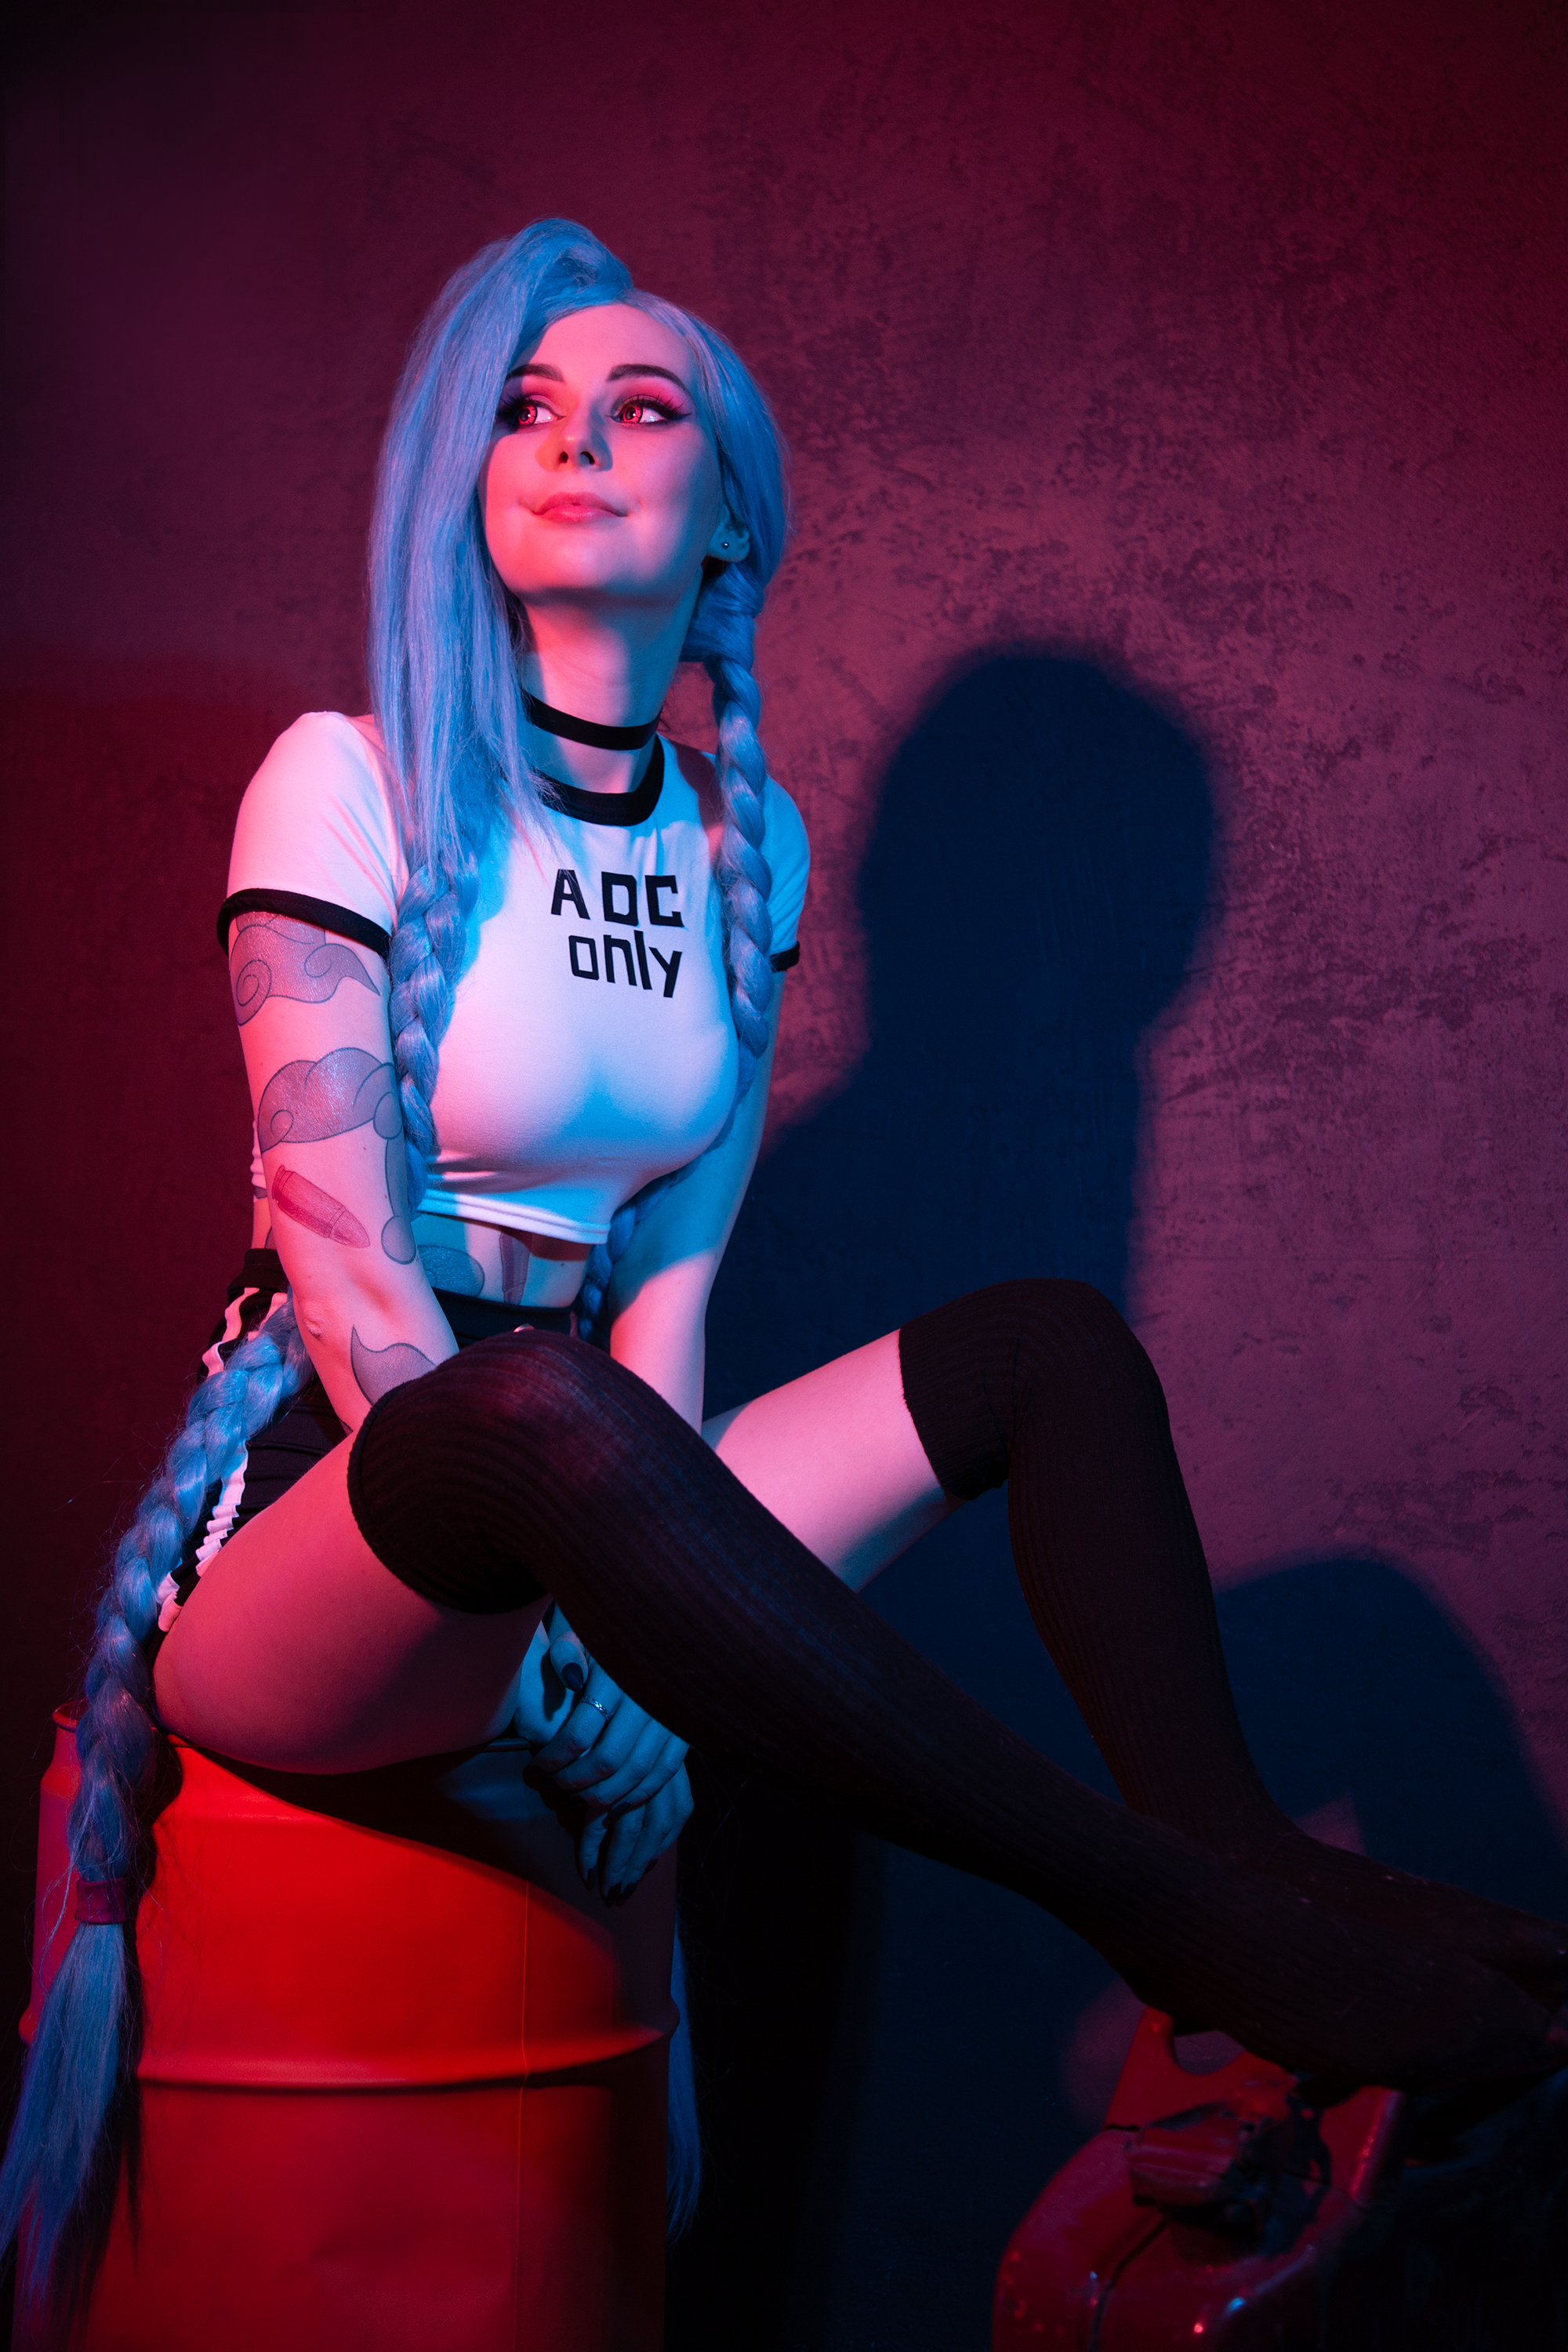 ADC only Jinx by NatsumiPon